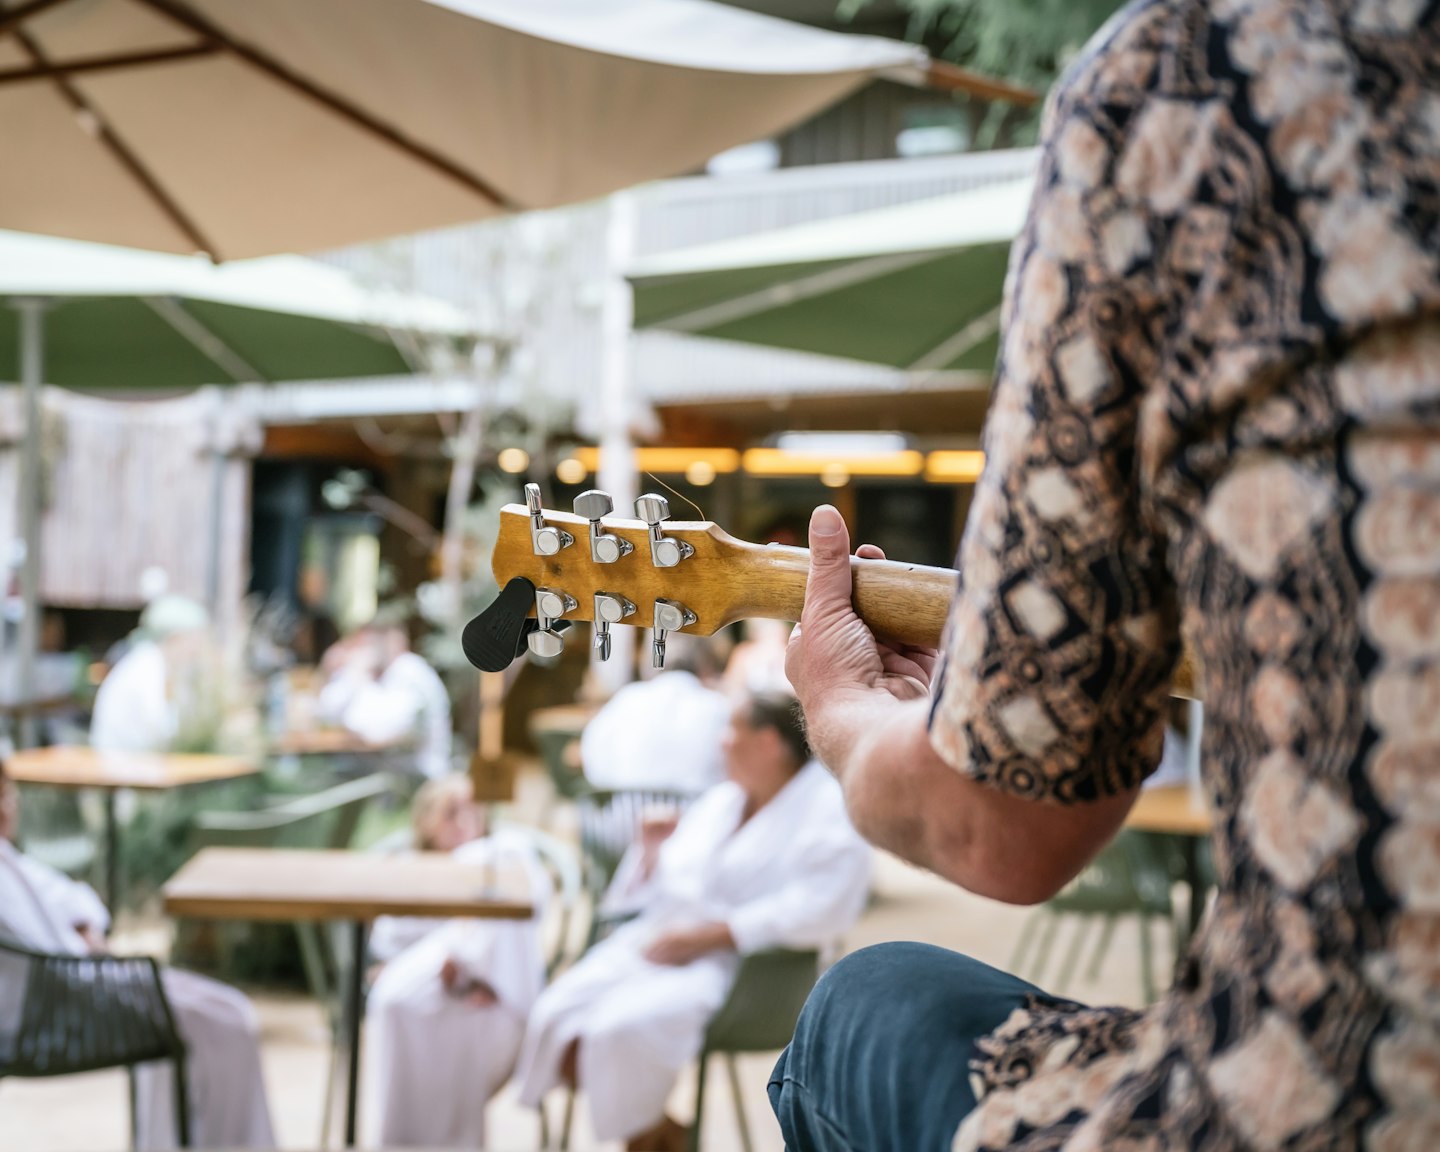 back view of man playing guitar with people in background in white bath robes sitting at café tables